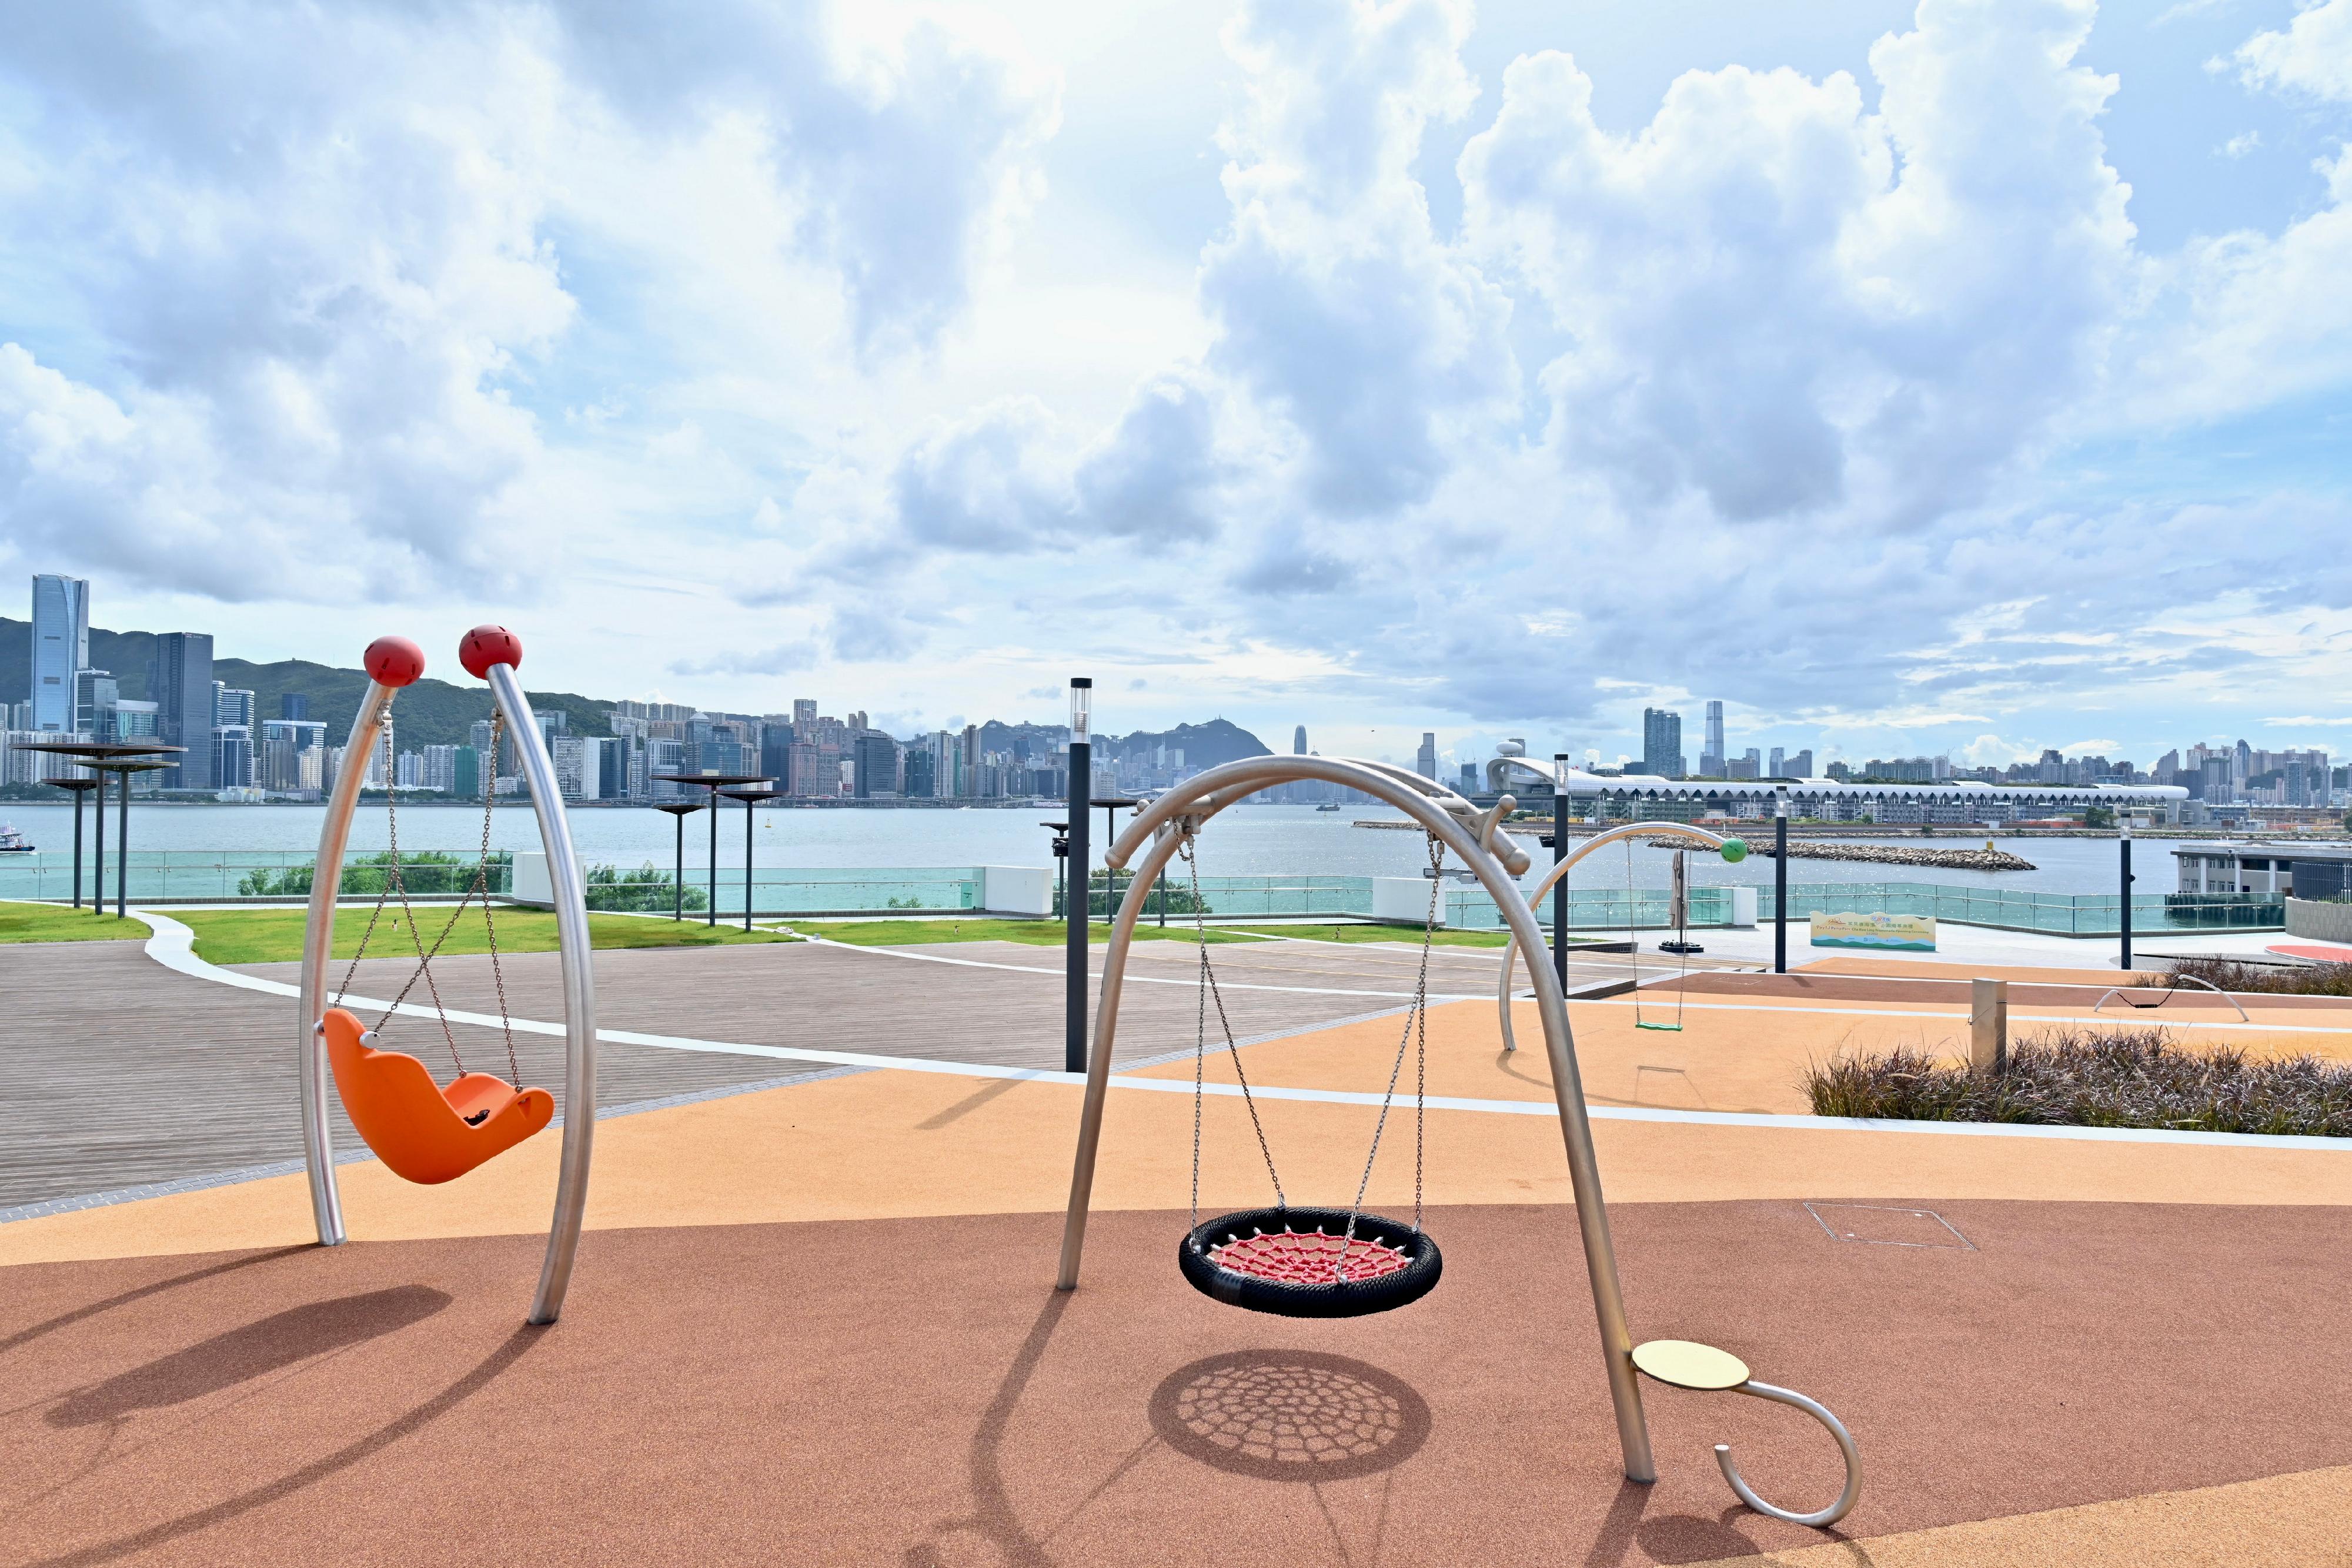 The Cha Kwo Ling Promenade and Tsui Ping Seaside officially opened today (August 24). Photo shows children's play facilities at the landscaped deck on the promenade.